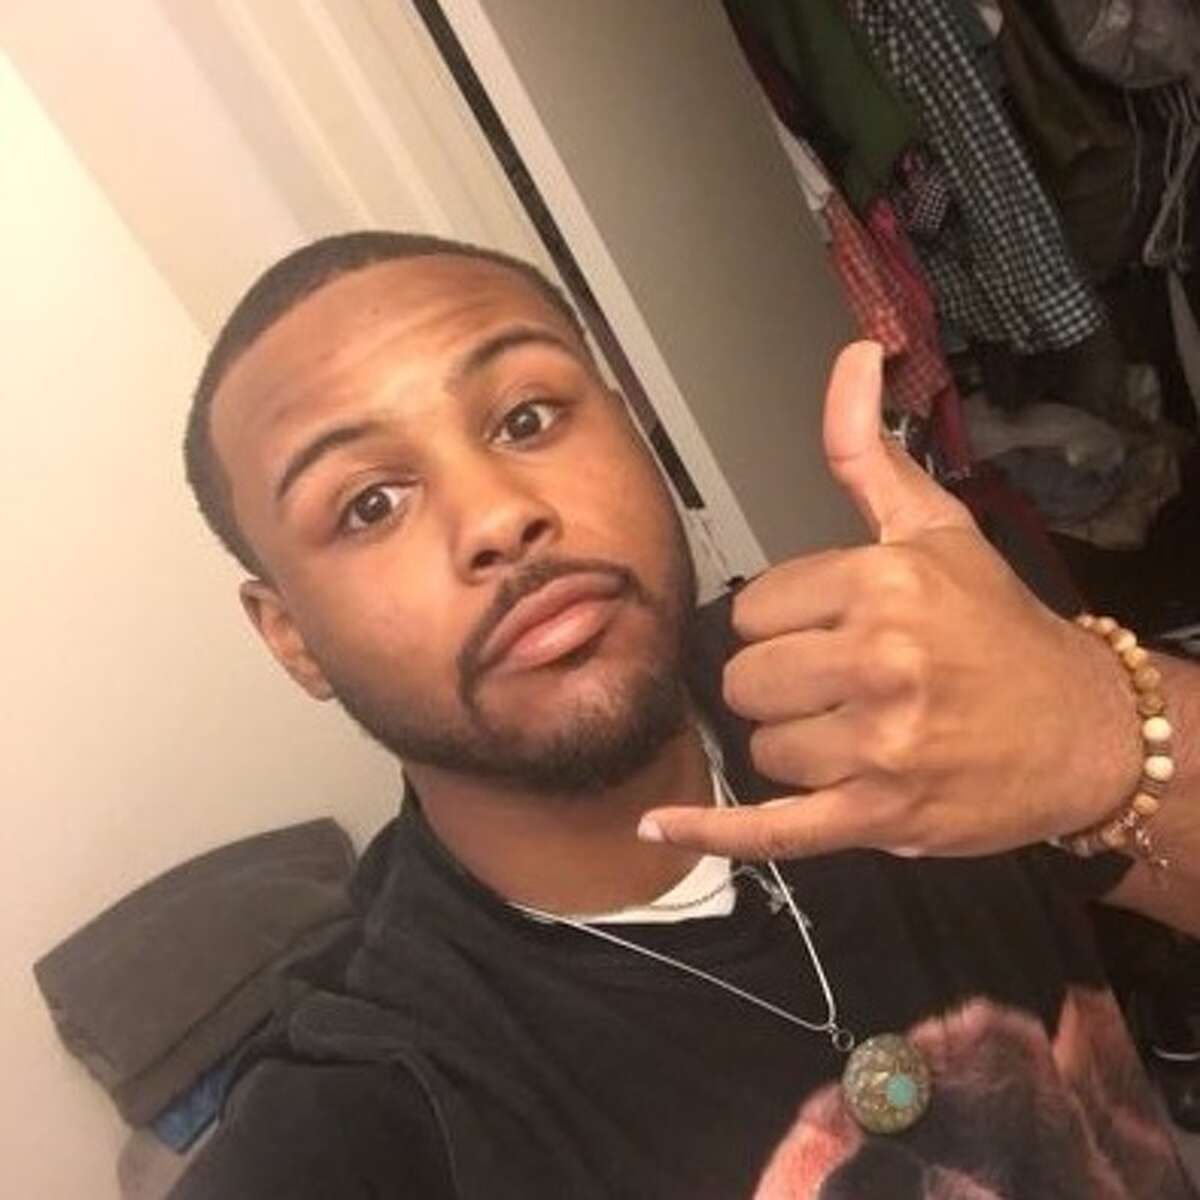 Kendrex White, seen in his Twitter profile photo above, was a biology junior at the University of Texas at Austin, according to his account.